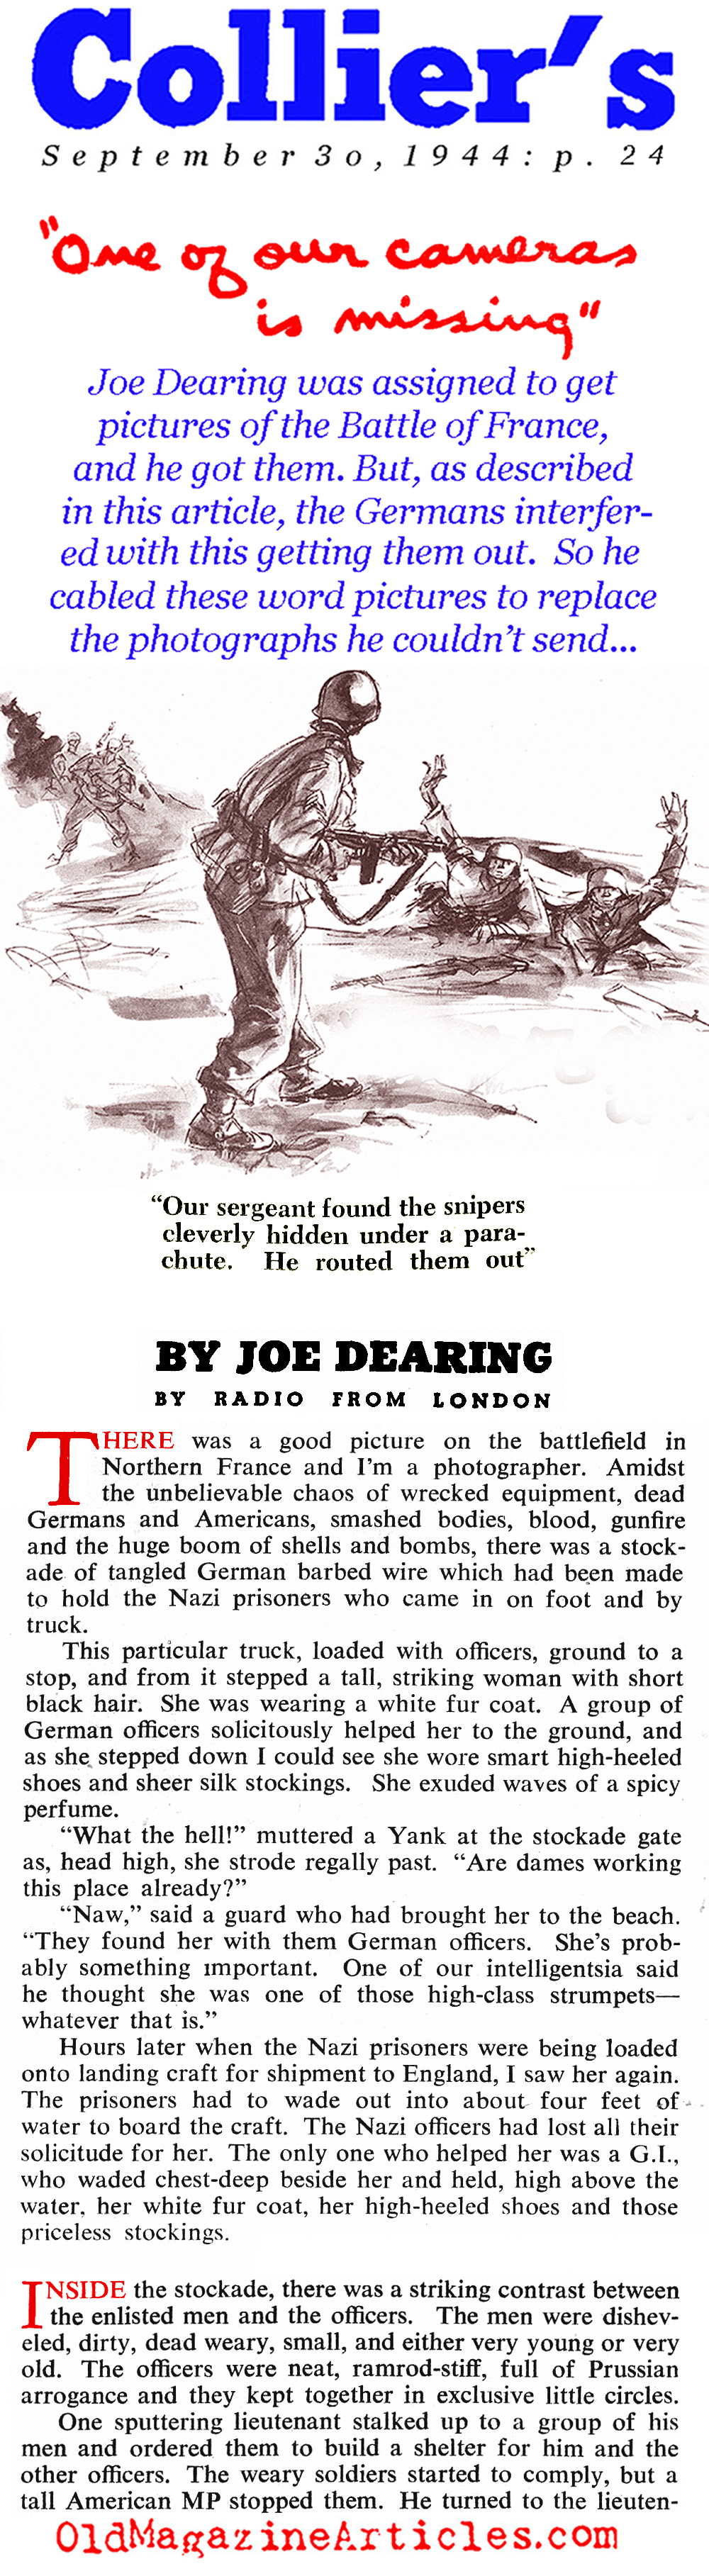 Eyewitness To The Battle For France (Collier's Magazine, 1944)